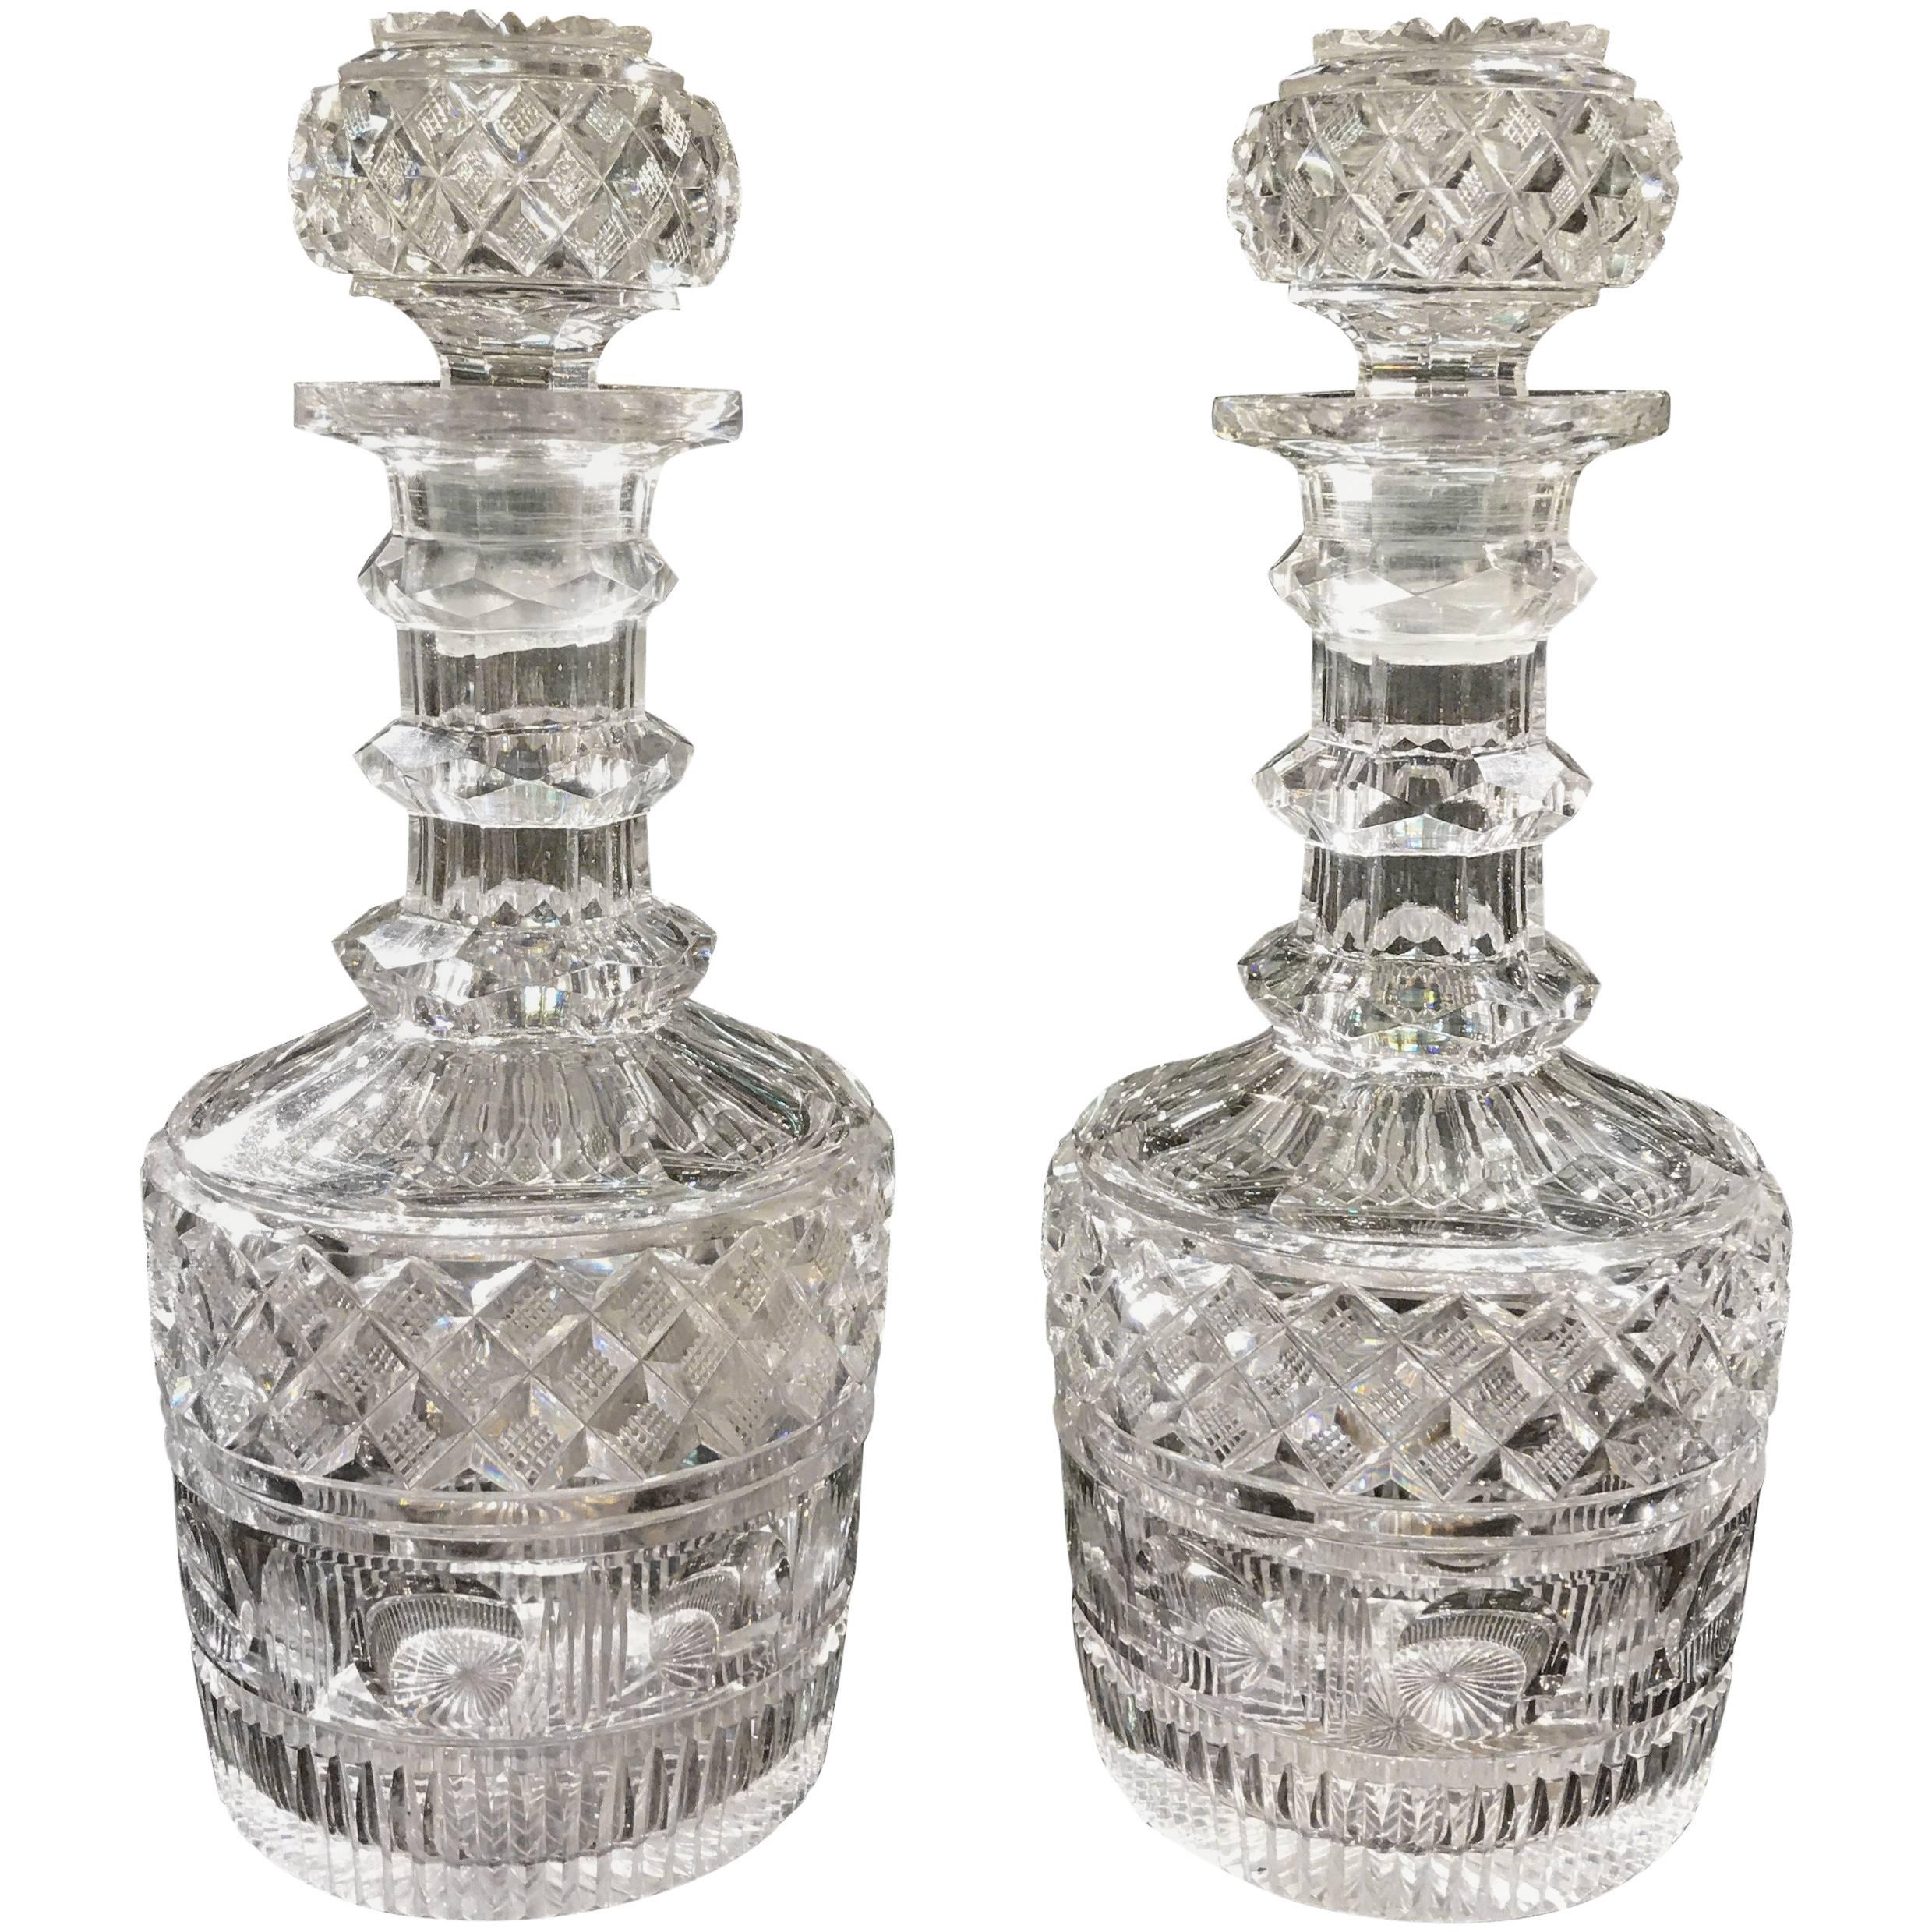 Pair of English Cut-Glass Decanters, Mid-19th Century